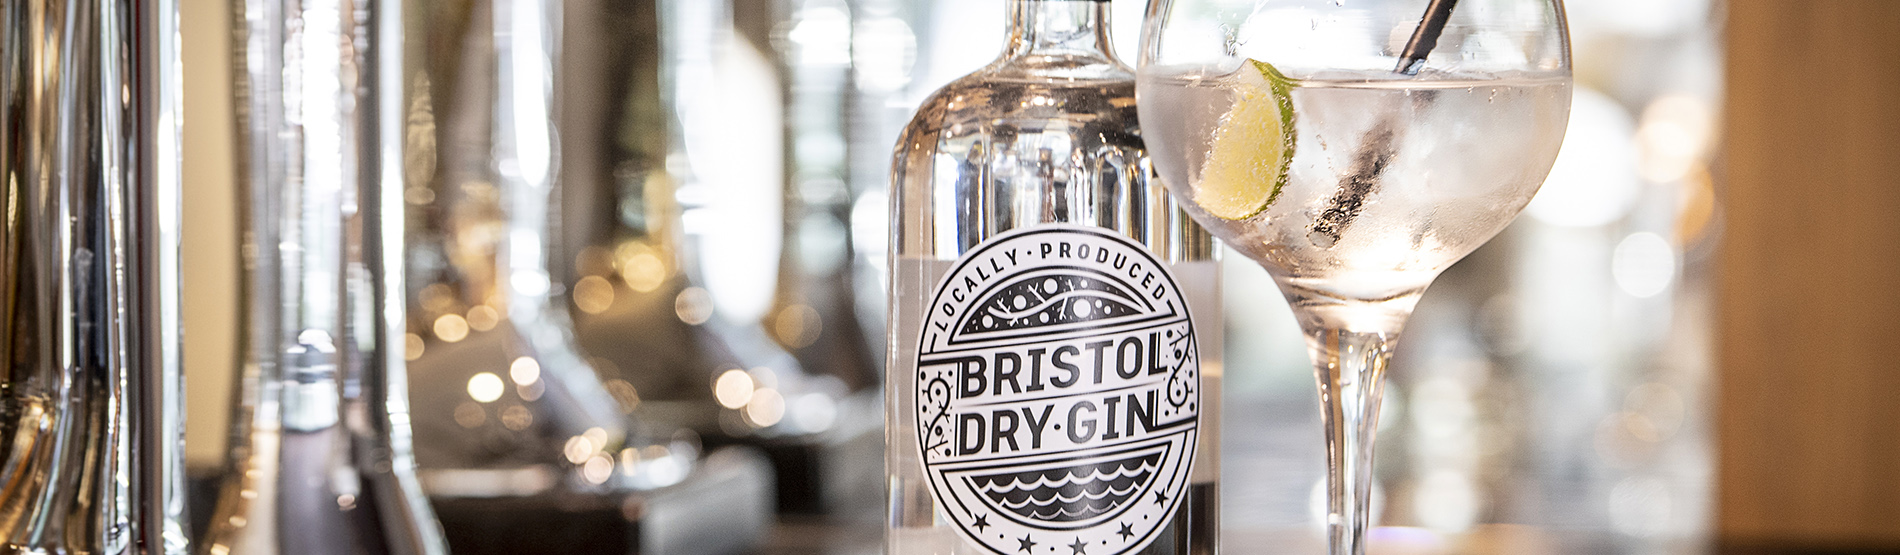 Gin Experience at The Bristol Hotel 